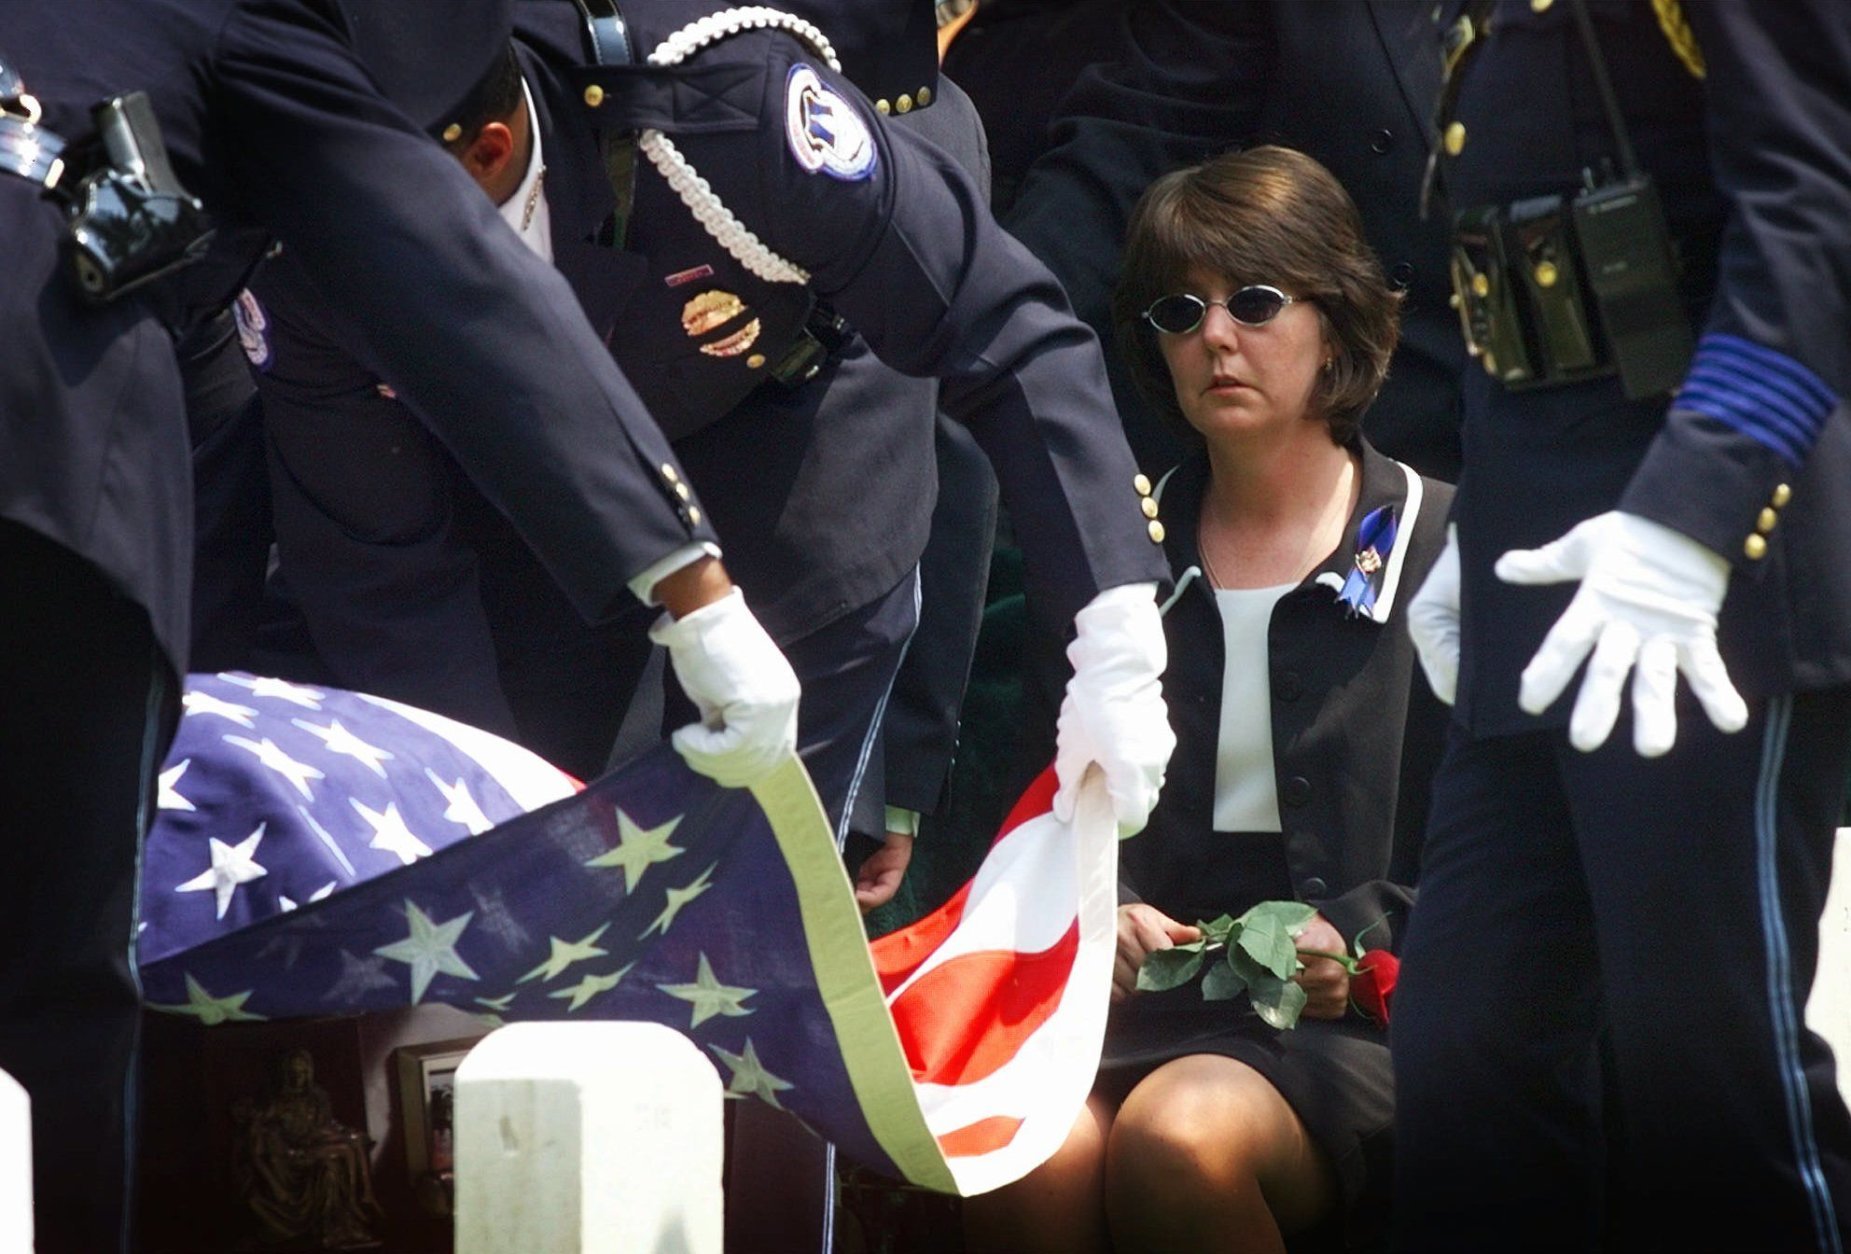 Evelyn Gibson, the wife of slain Capitol Hill police officer John Gibson, holds a rose as an American flag is folded to be presented to her Thursday July 30, 1998 at graveside ceremonies at Arlington National Cemetery in Arlington, Va. Gibson and fellow Capitol Hill police officer Jacob Chestnut were killed on Friday July 24, 1998 when a gunman burst into the Capitol. (AP Photo/Doug Mills)